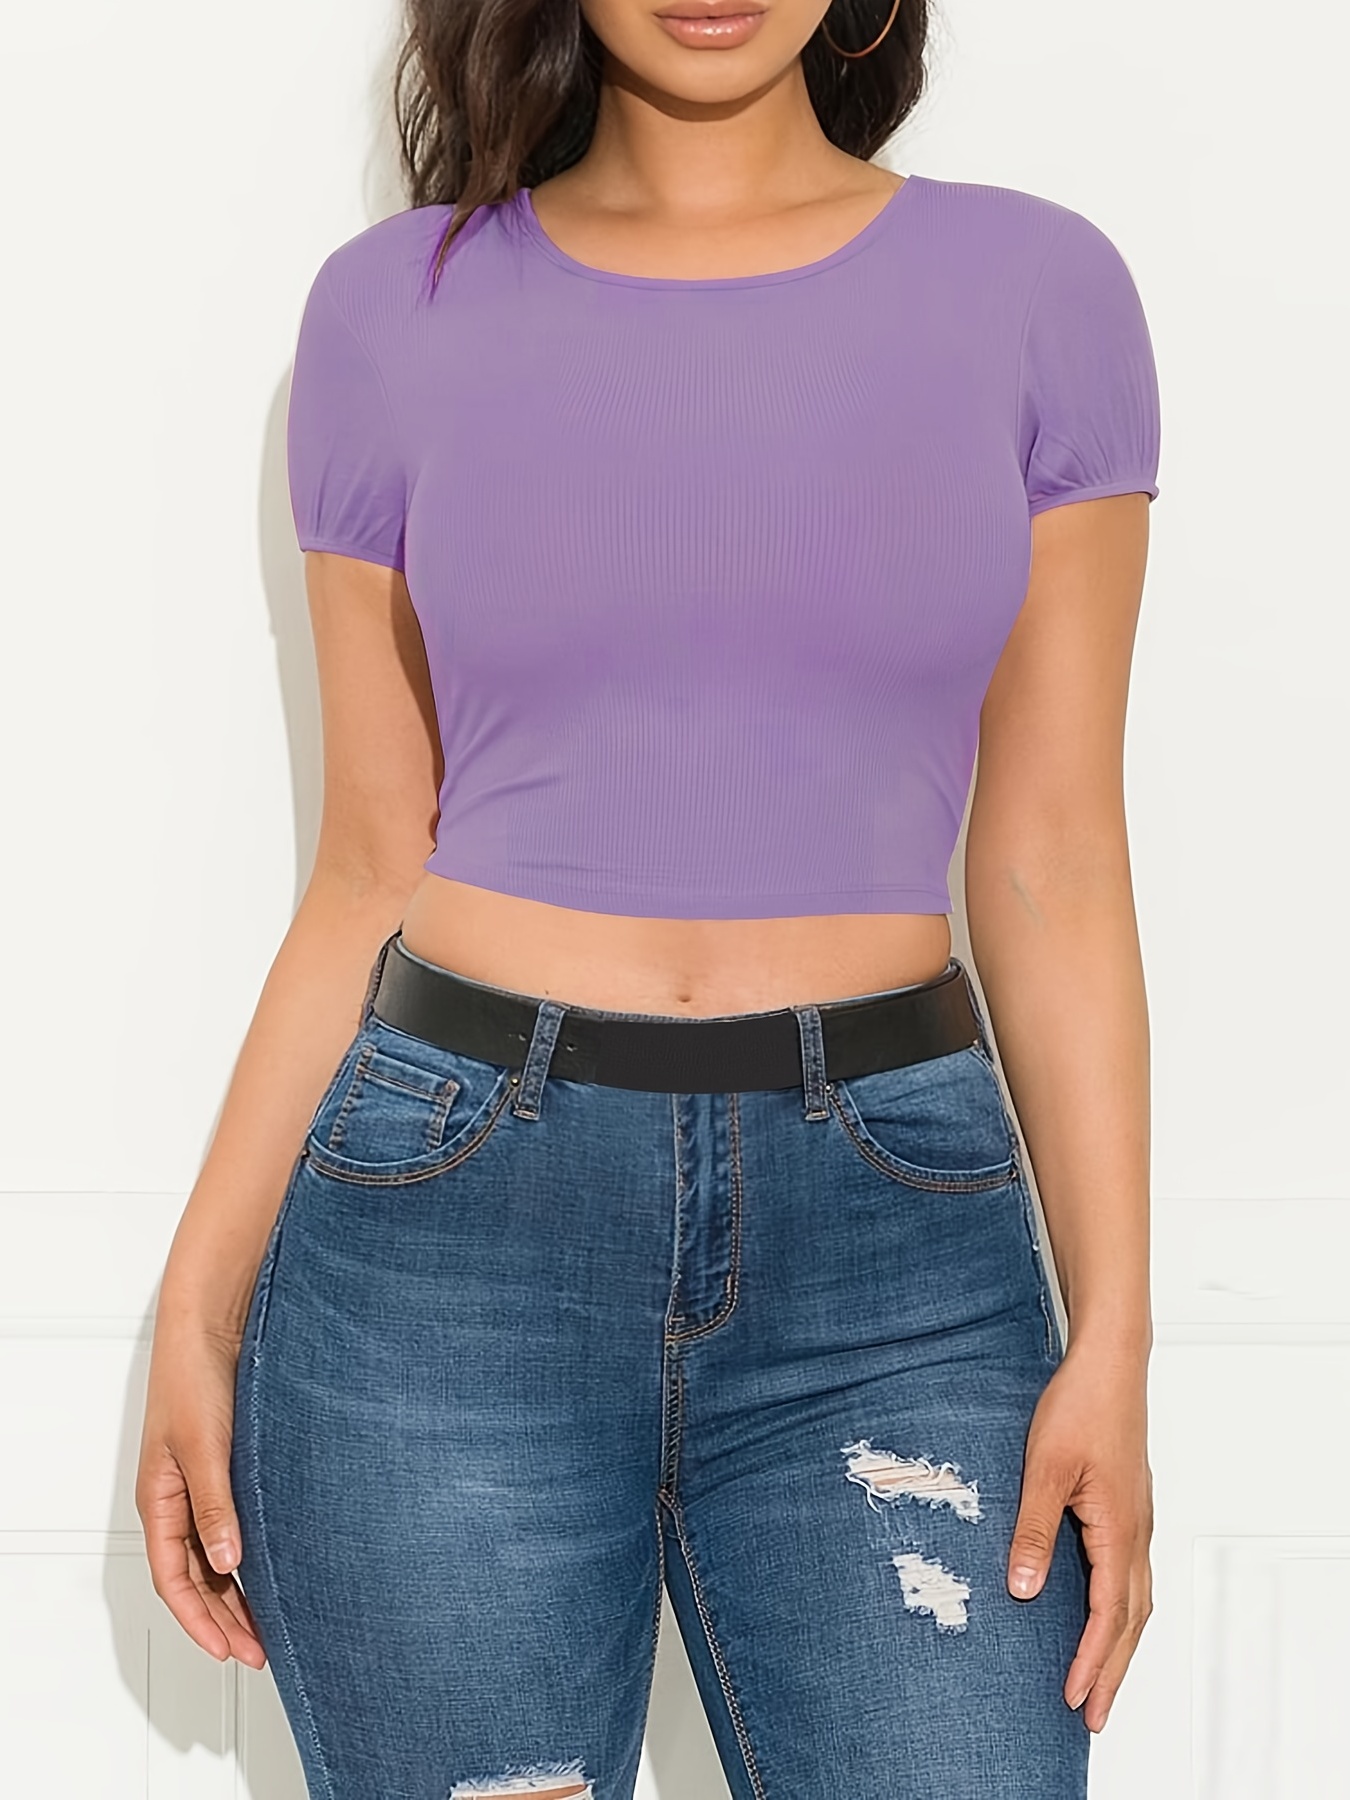 Cropped Tops & T-Shirts.